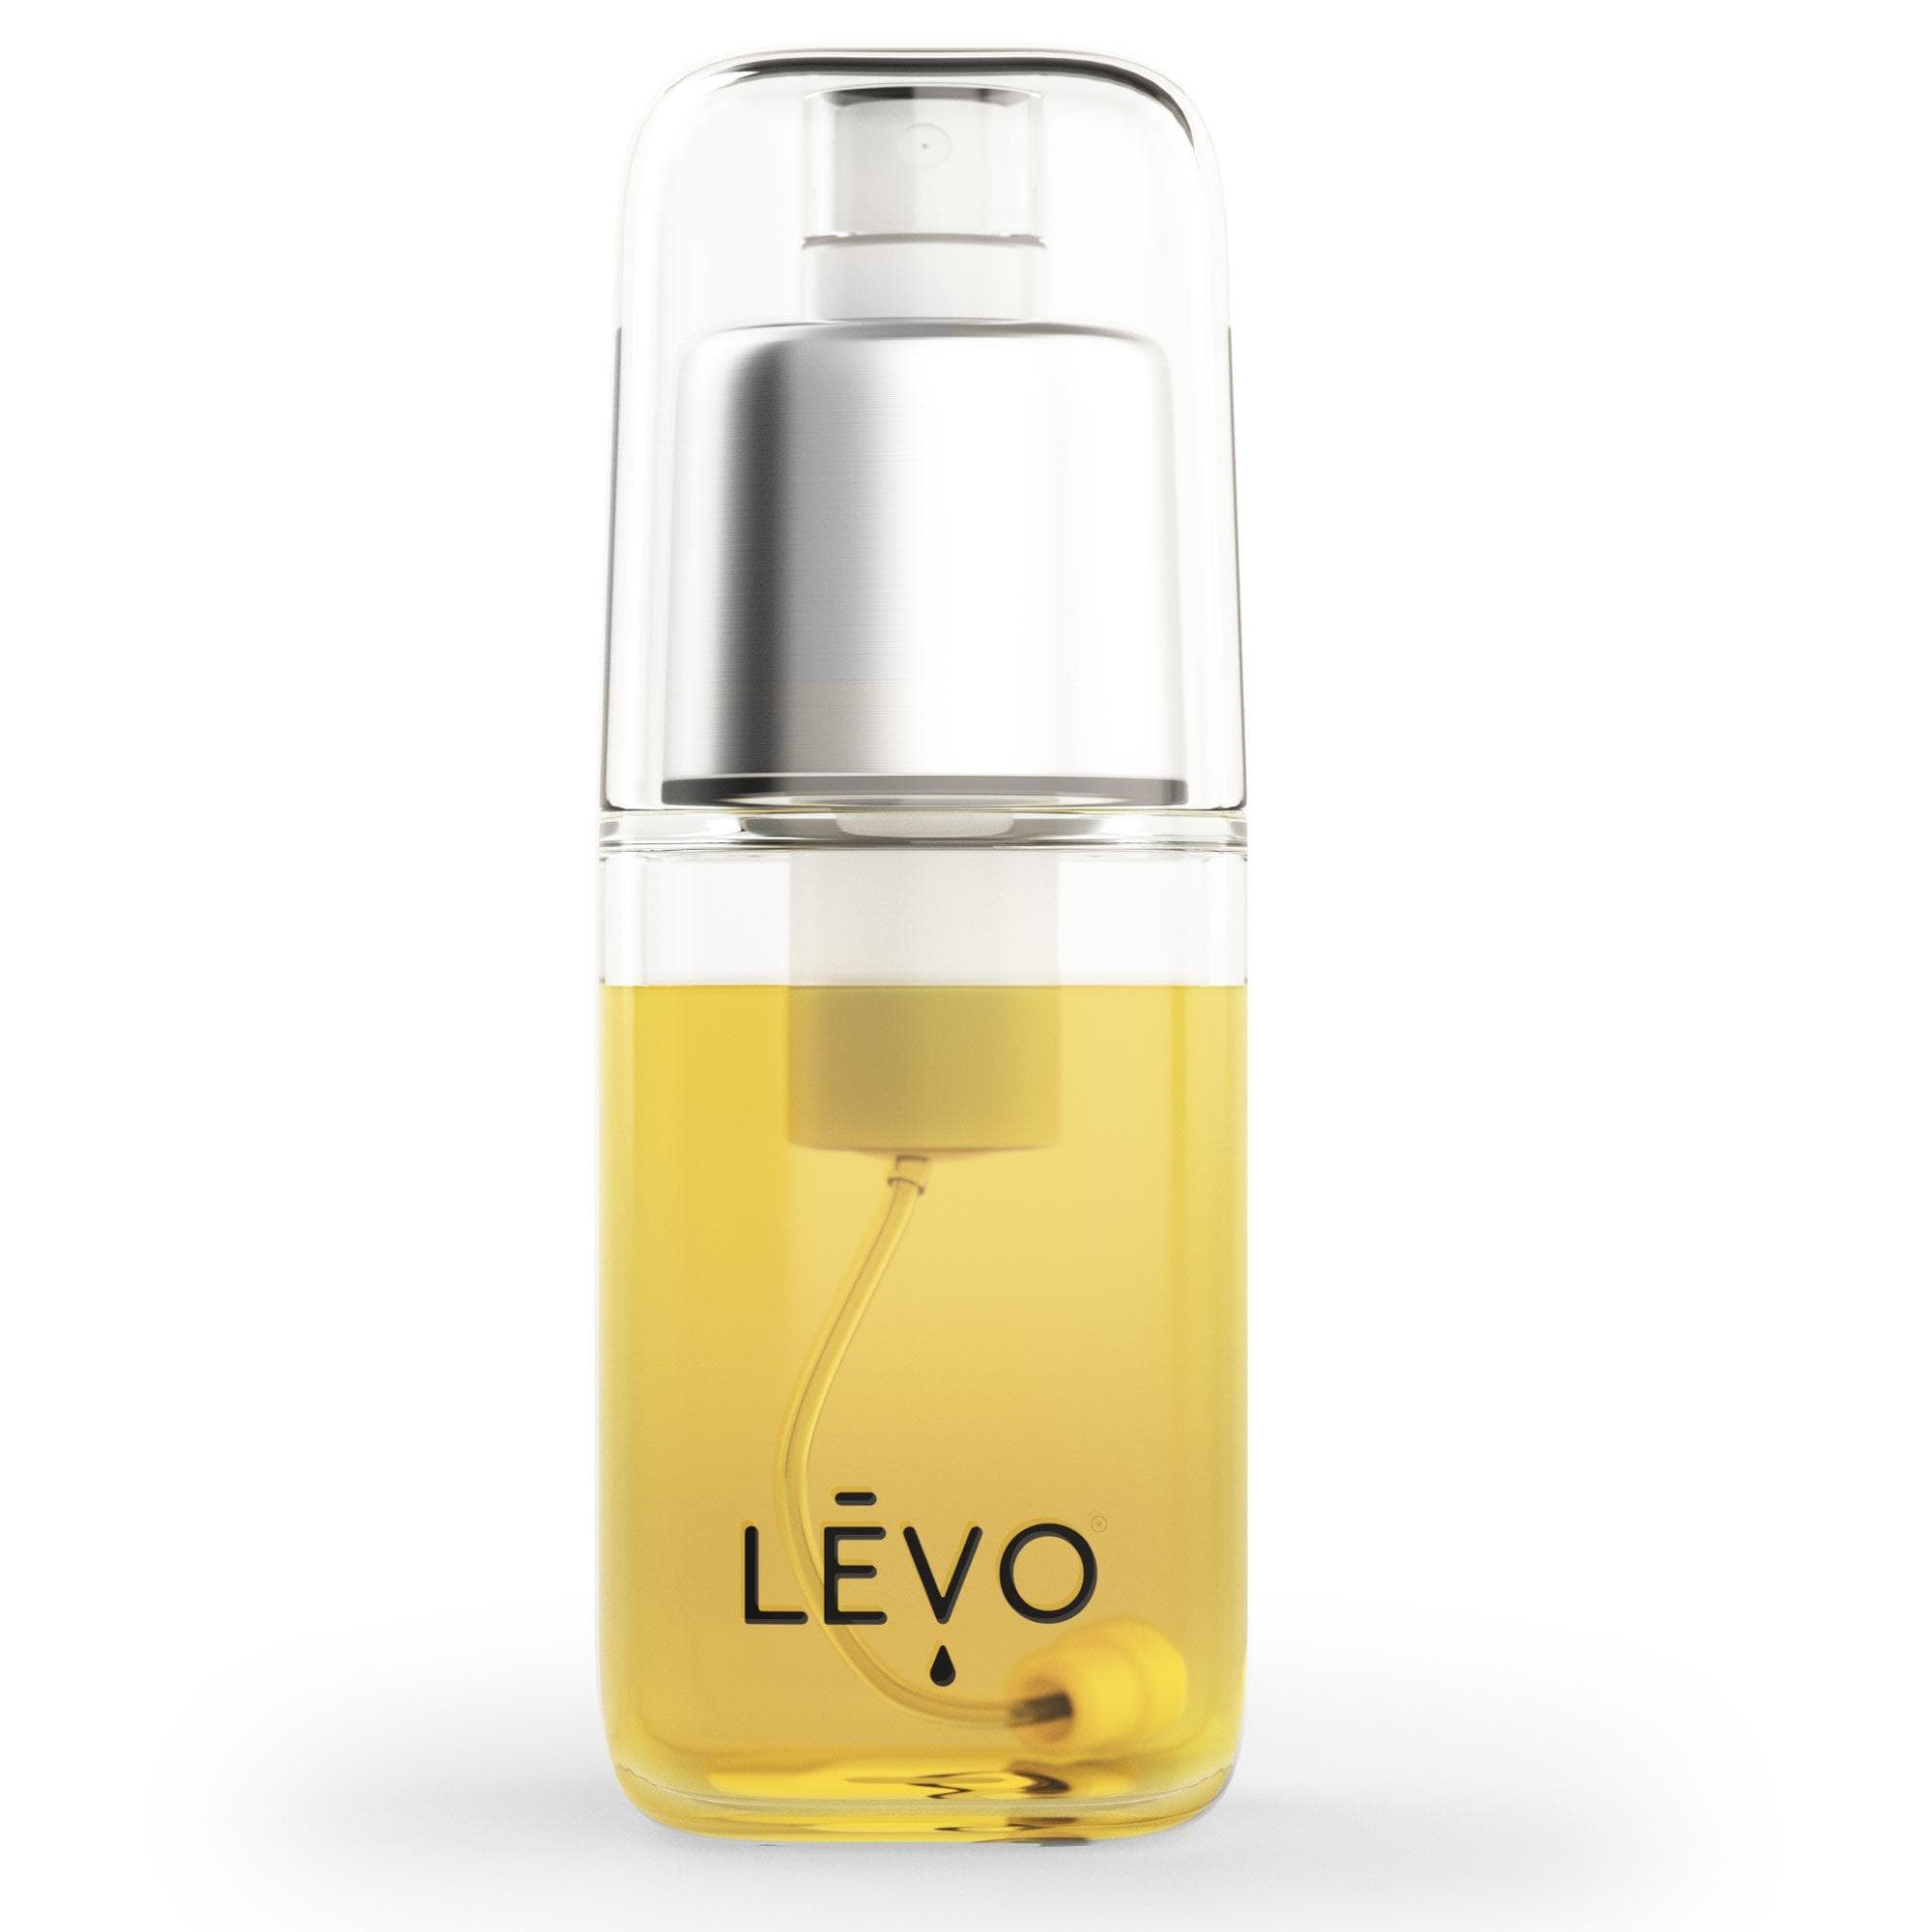 LEVO oil or butter fine mist sprayer, reusable and eco-friendly! LEVO - Fine Oil Mister Infusion Sprayer - Oil Sprayer for Cooking, Baking and Salad Making - Oil Spritzer for your LEVO Oil and Butter Herbal Infusions - 6 fl oz